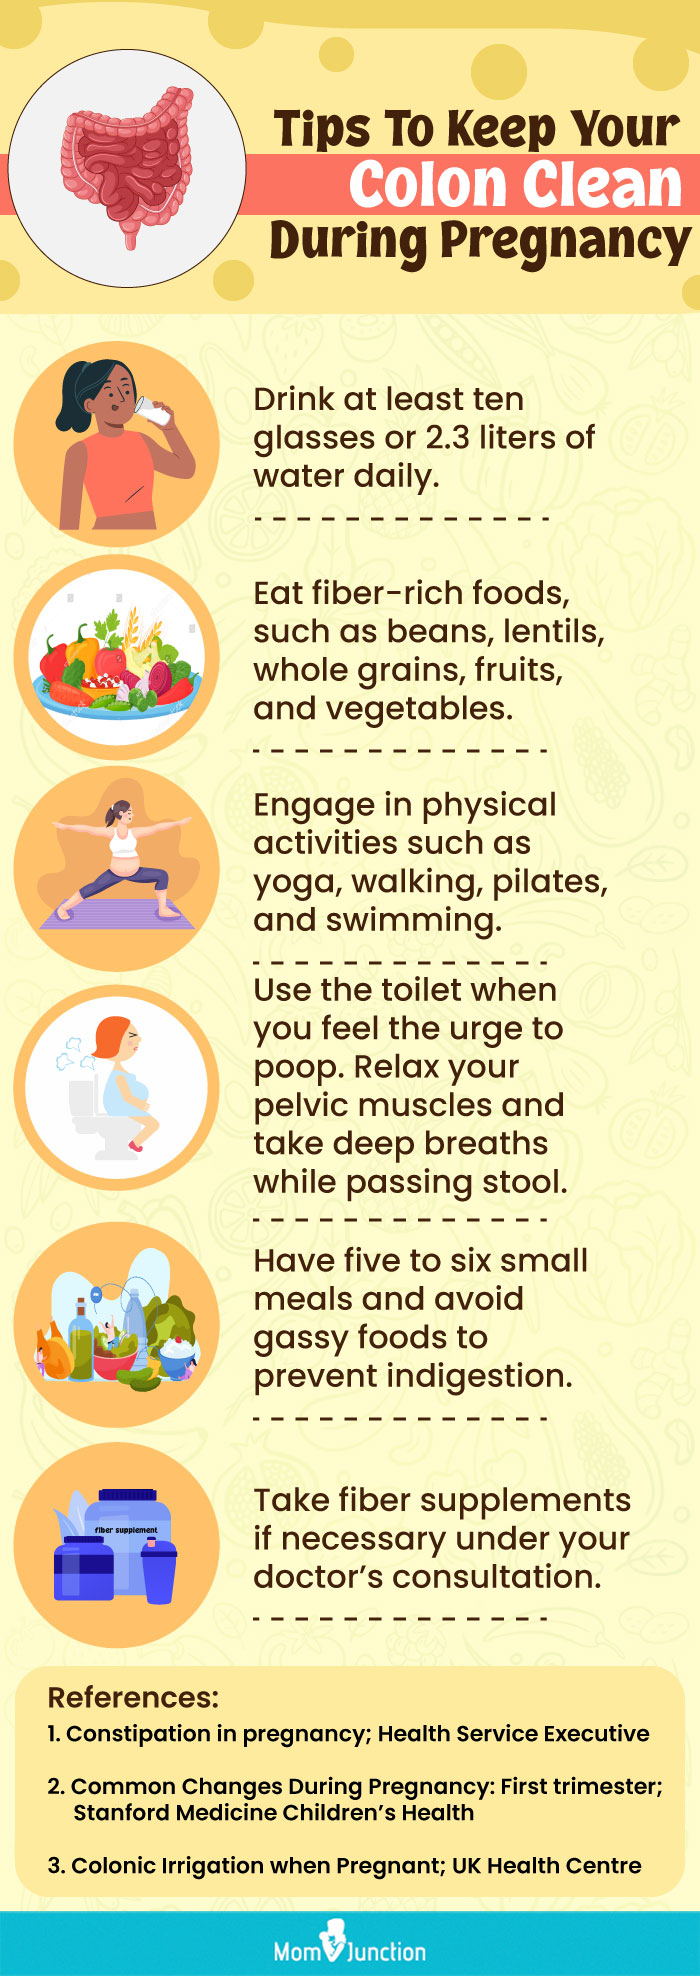 tips to keep your colon clean during pregnancy (infographic)